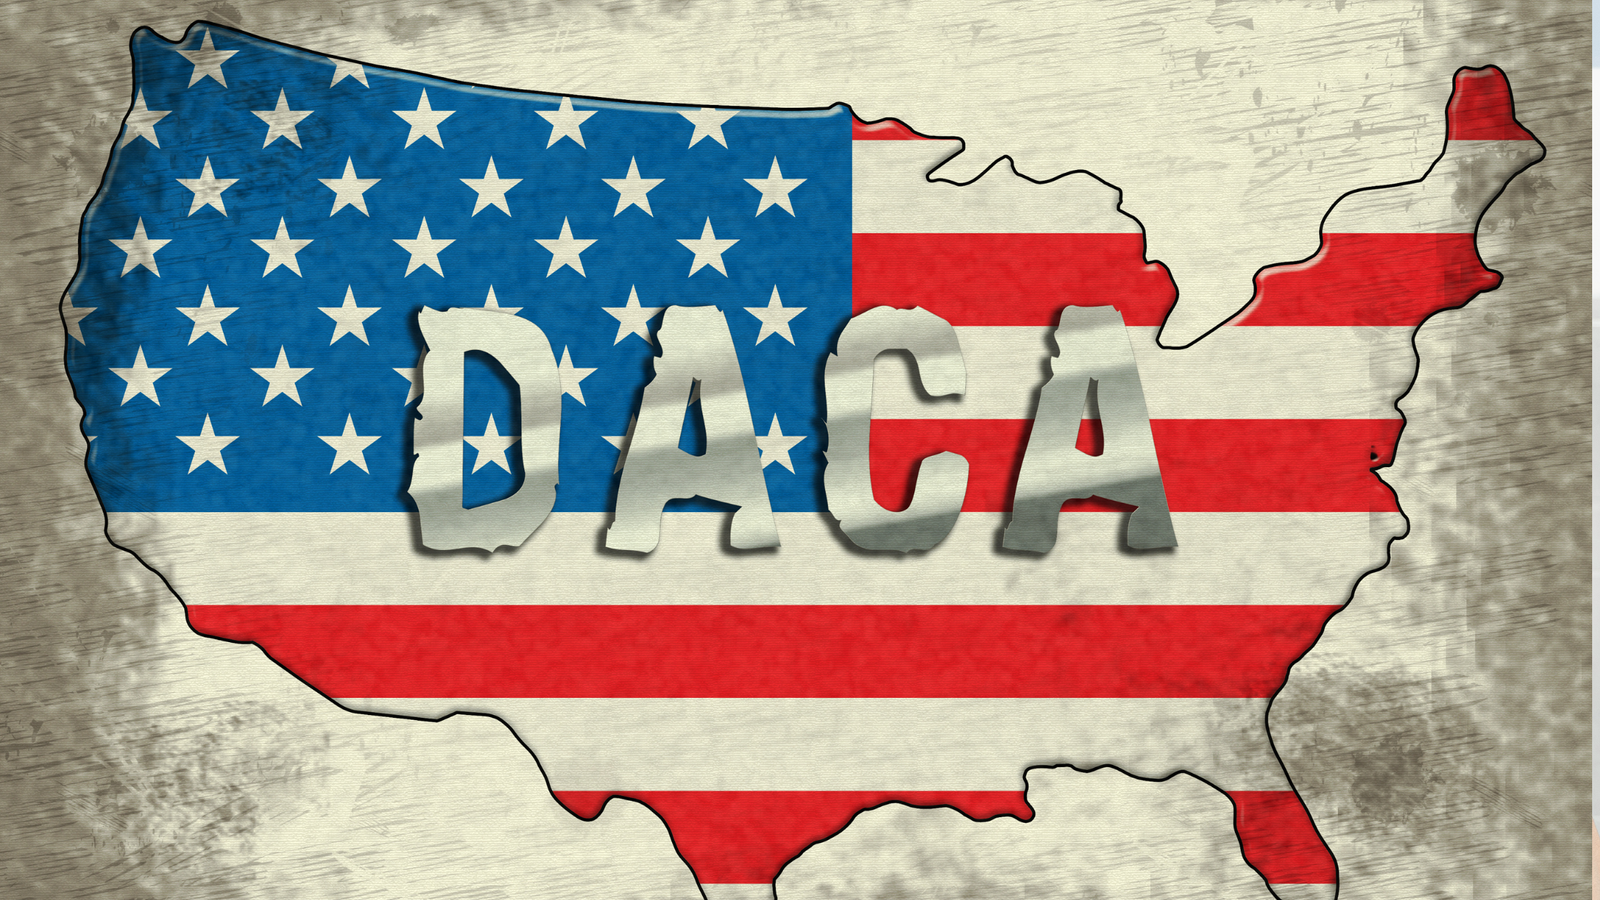 DACA Updates: The Latest on Deferred Action for Childhood Arrivals